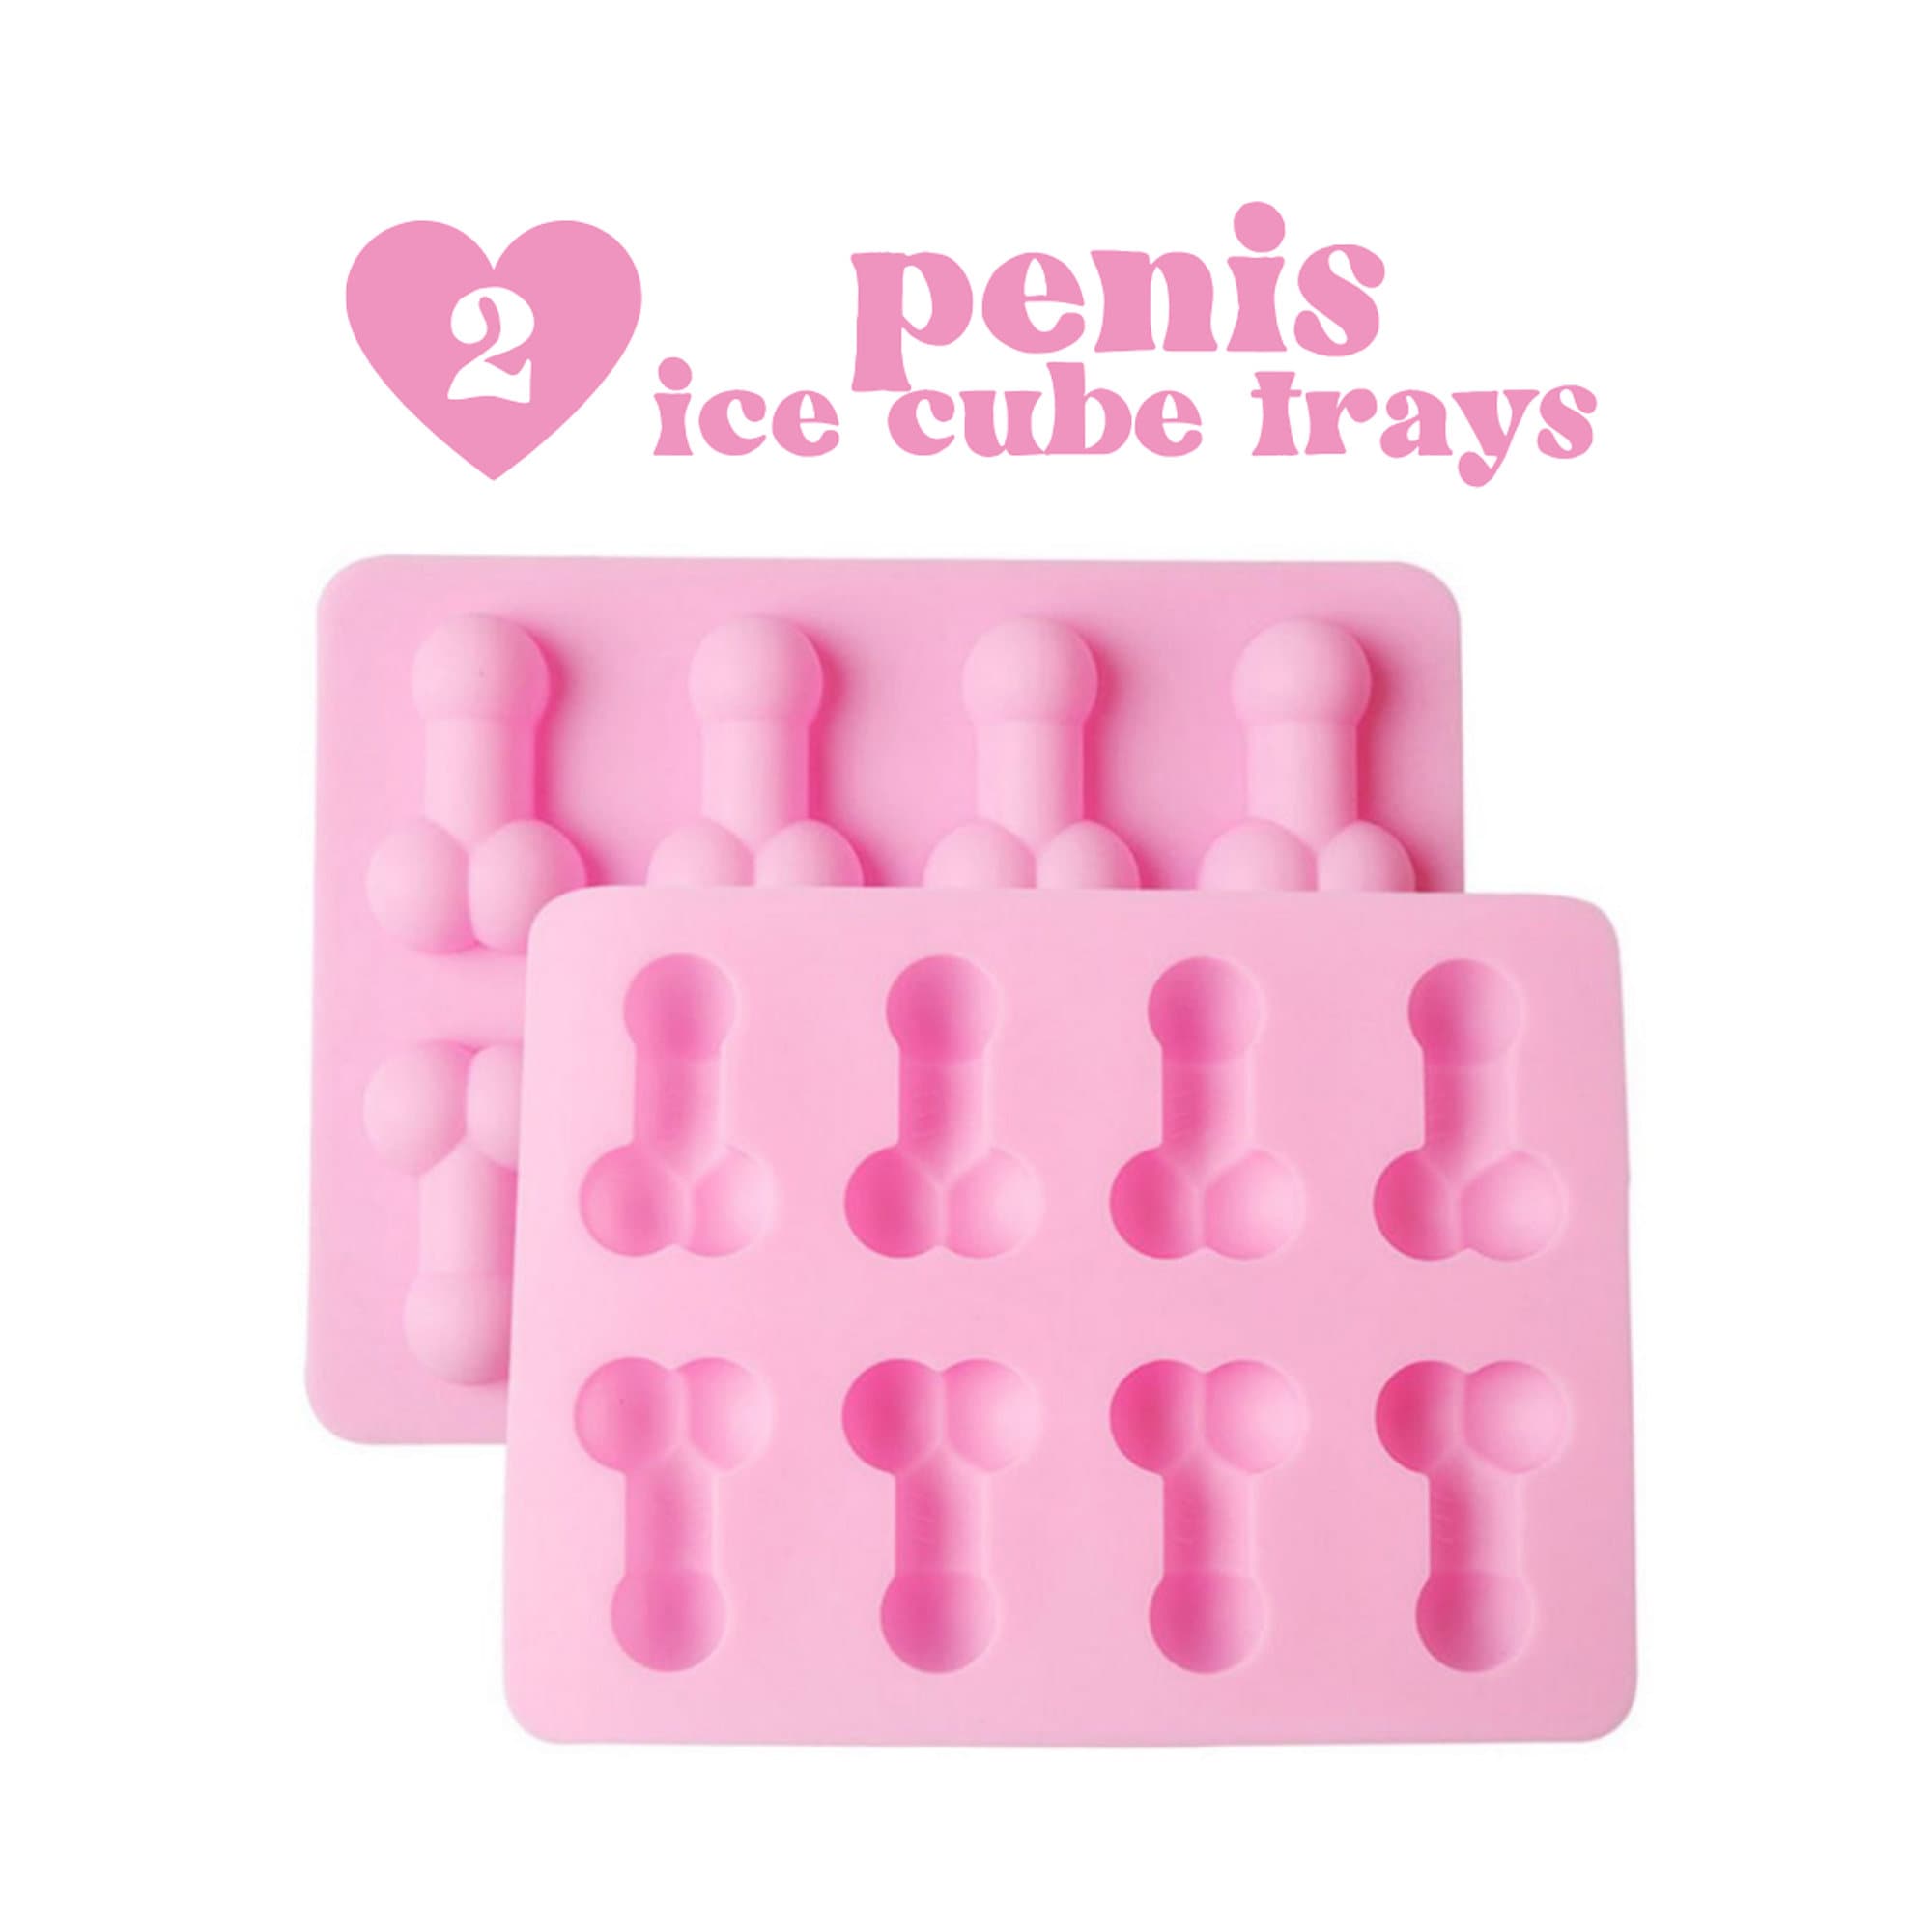 Bachelorette Party Decorations Giant Penis Ice Mold for Drinks - The  Perfect Bachelorette Party Favors and Bachelorette Party Supplies for your  Bride